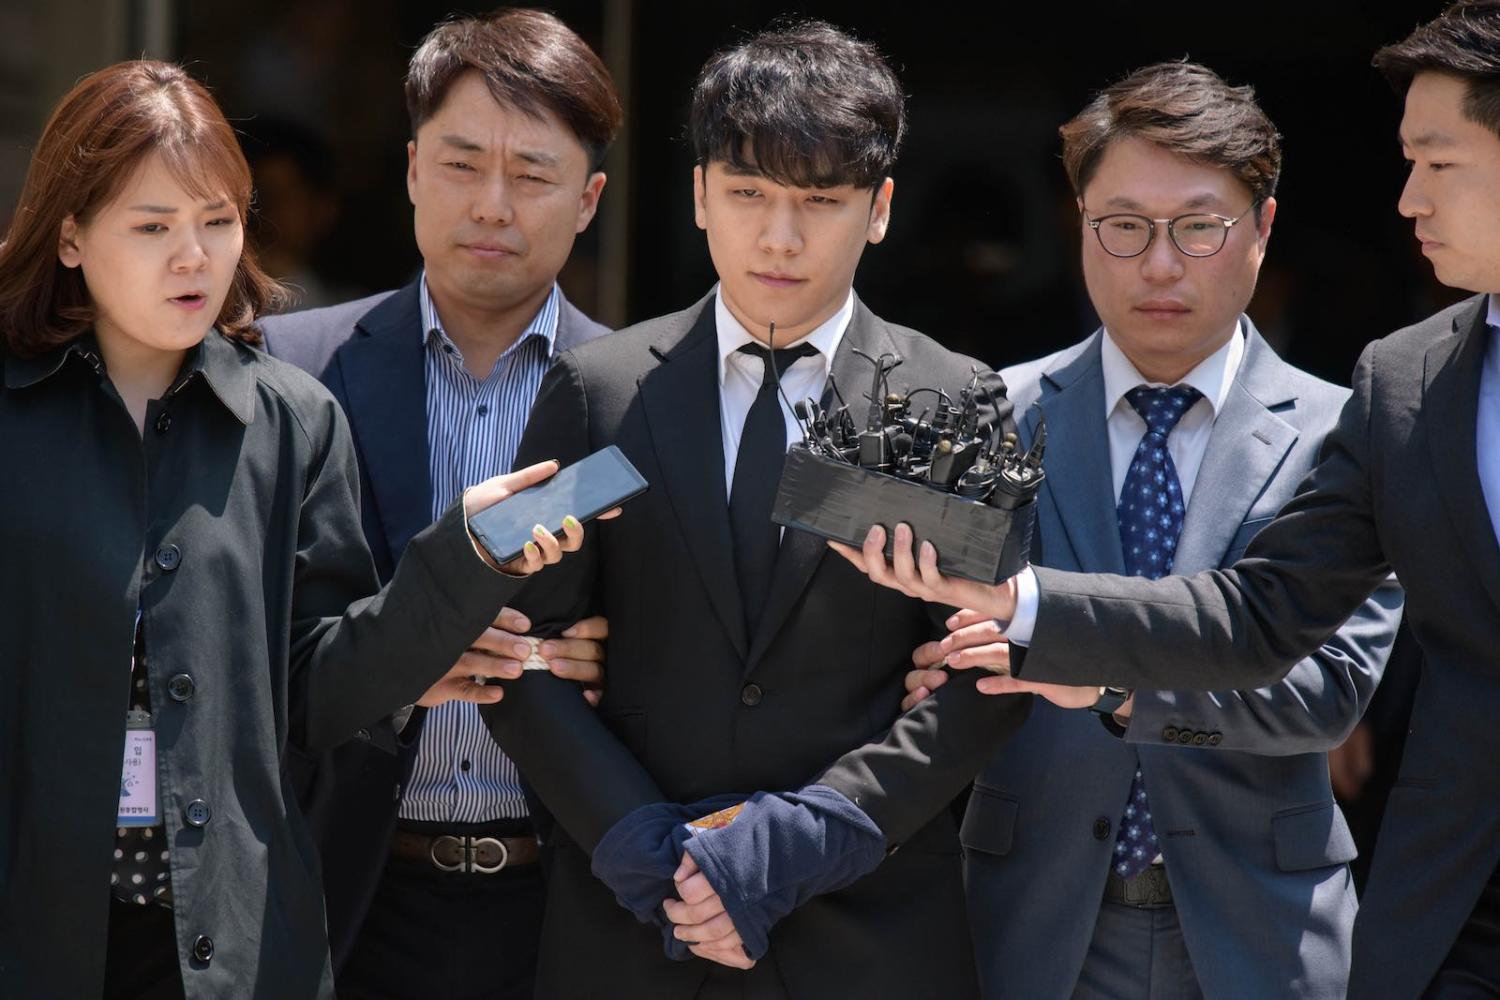 Former Big Bang boyband member Seungri, centre, real name Lee Seung-hyun, leaves the High Court in Seoul in May (Photo: Ed Jones via Getty)